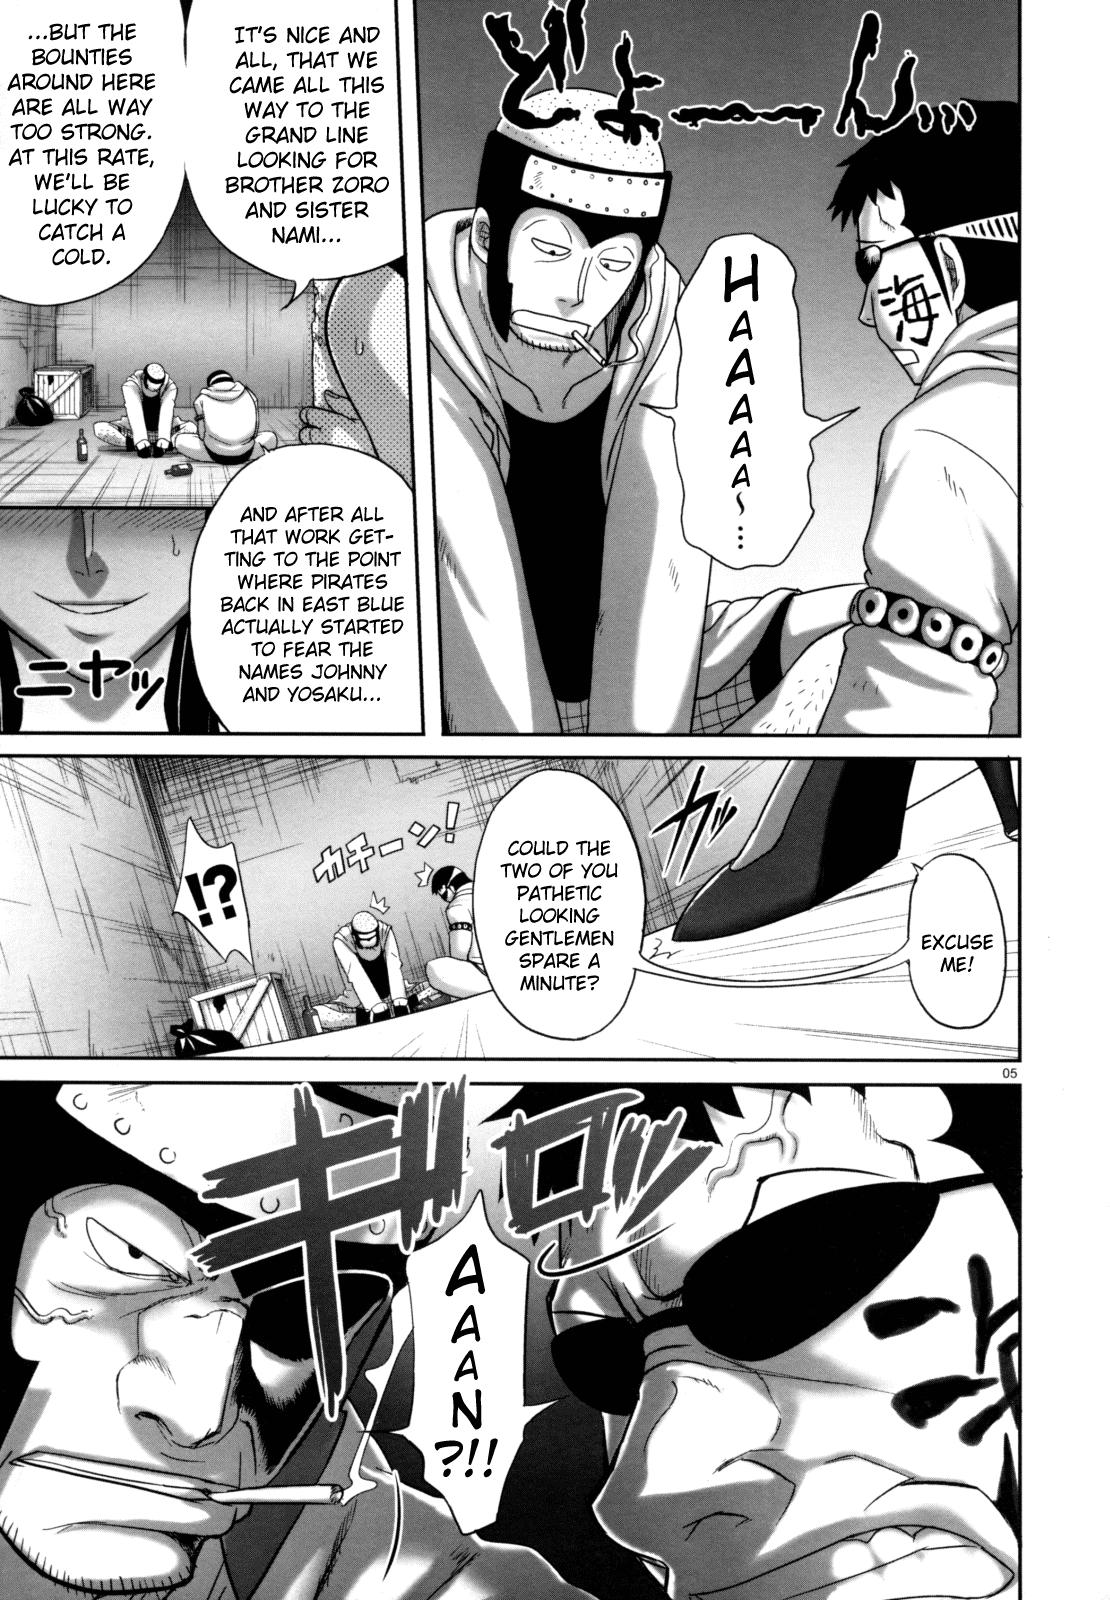 Spy Untimely Flowering - One piece Bisexual - Page 4